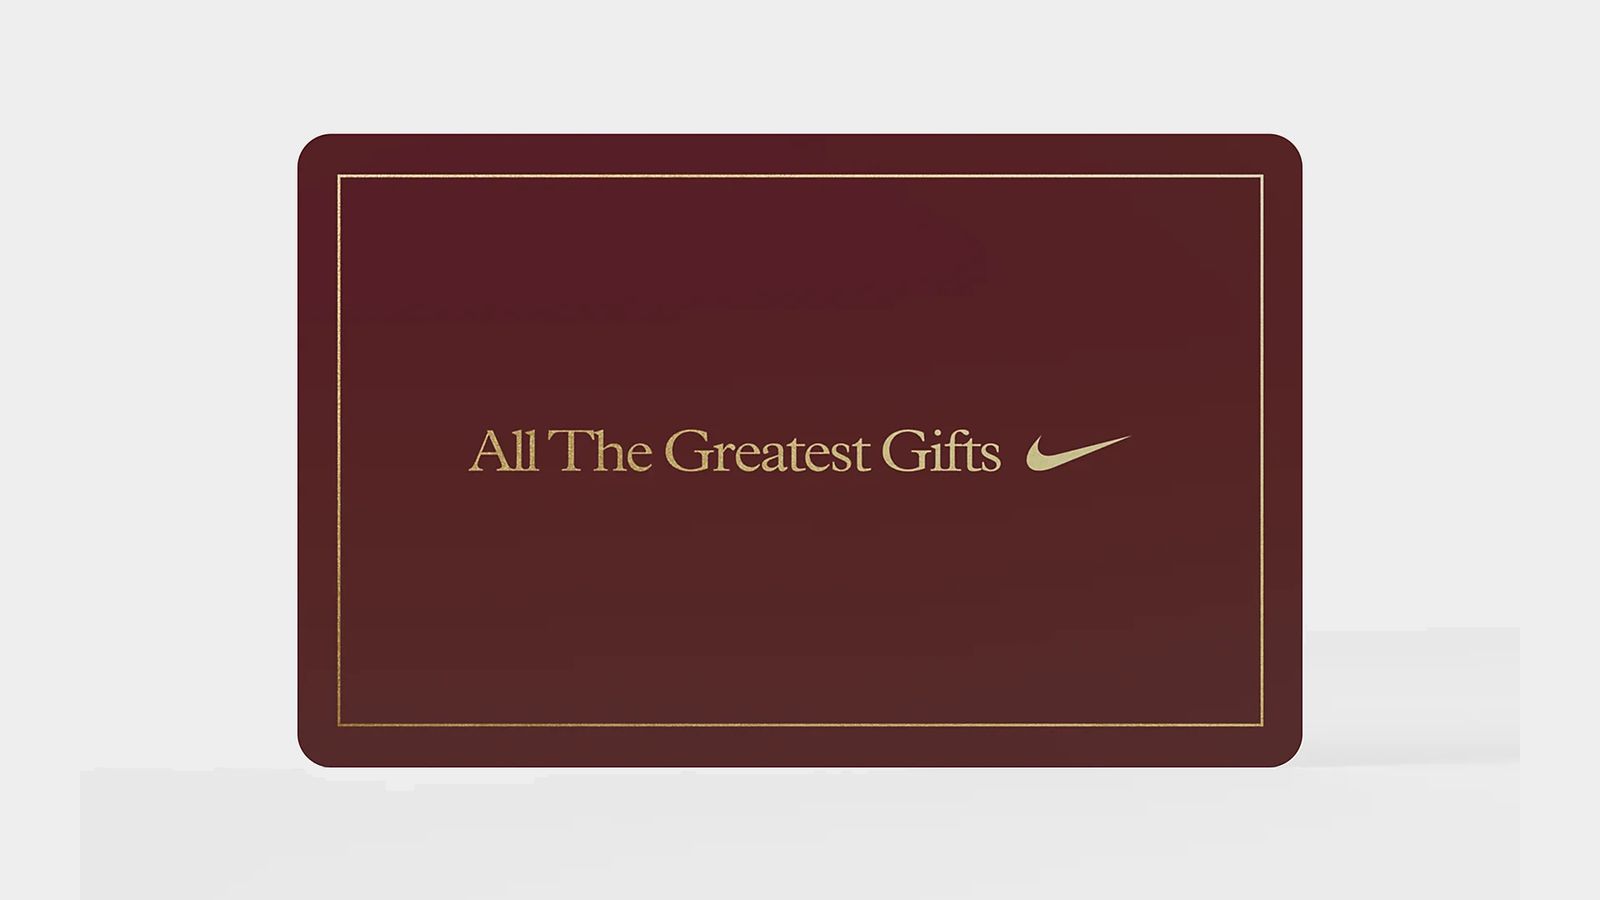 Nike Digital Gift Card product image of a dark red card with gold trim and branding.